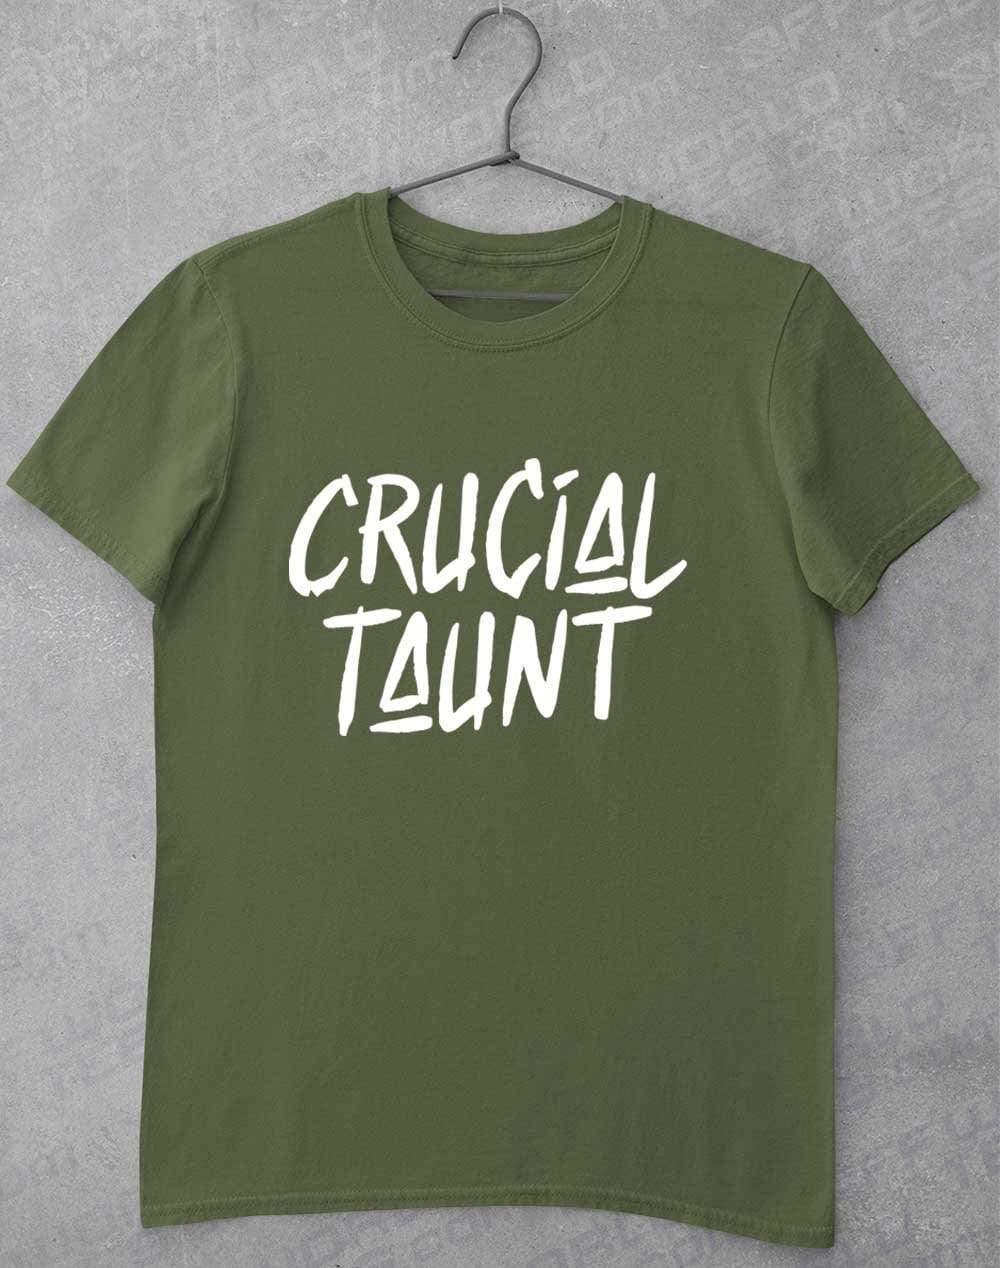 Crucial Taunt T-Shirt S / Military Green  - Off World Tees